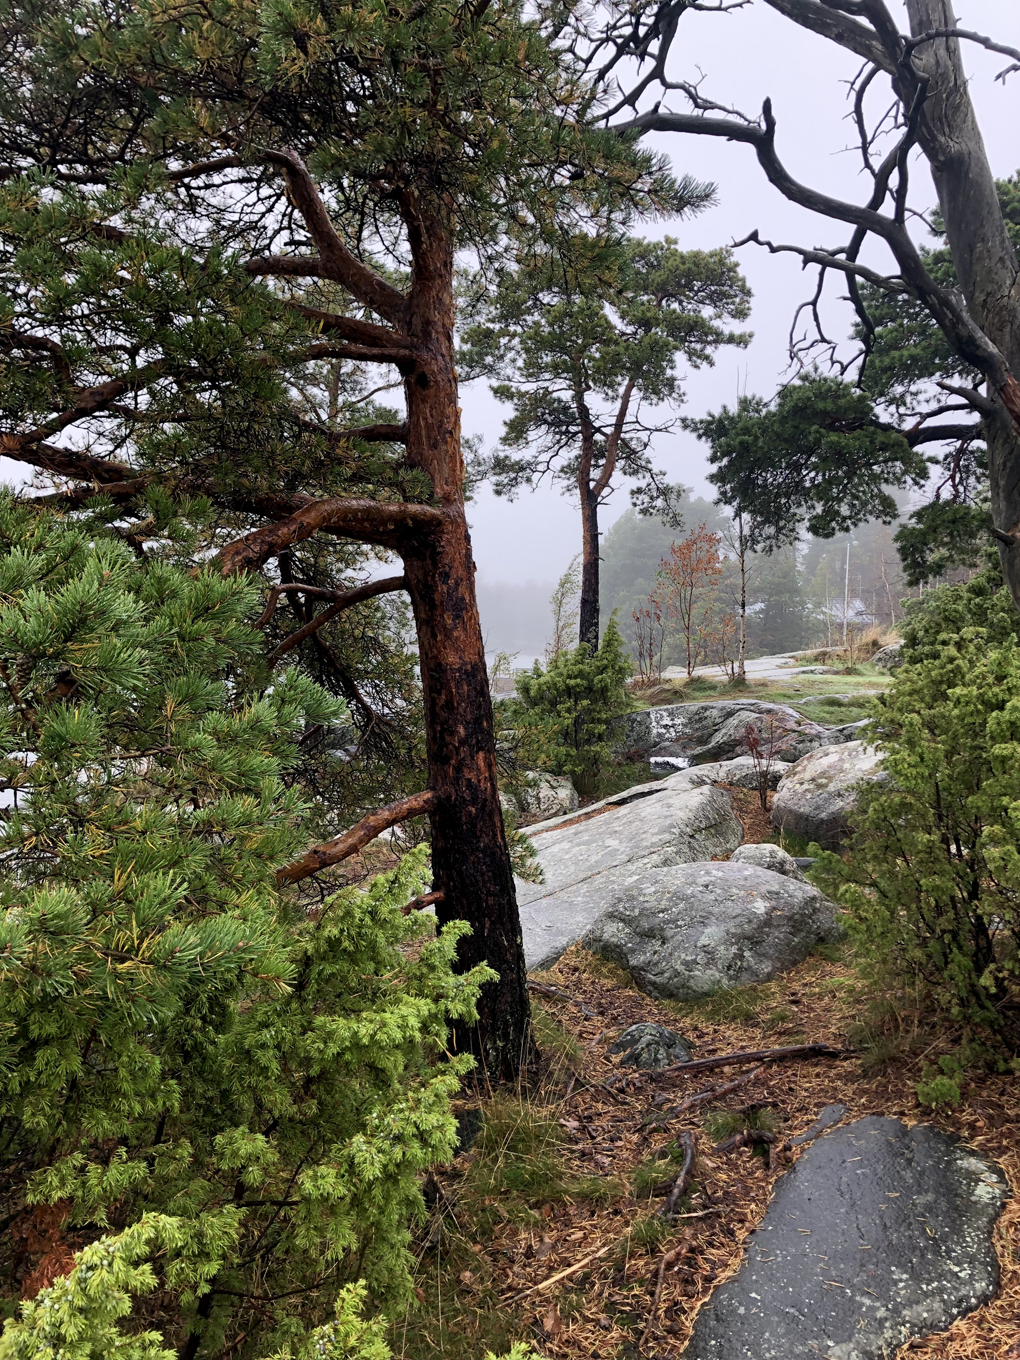 Bendy pine tree and some rocks in a foggy weather.